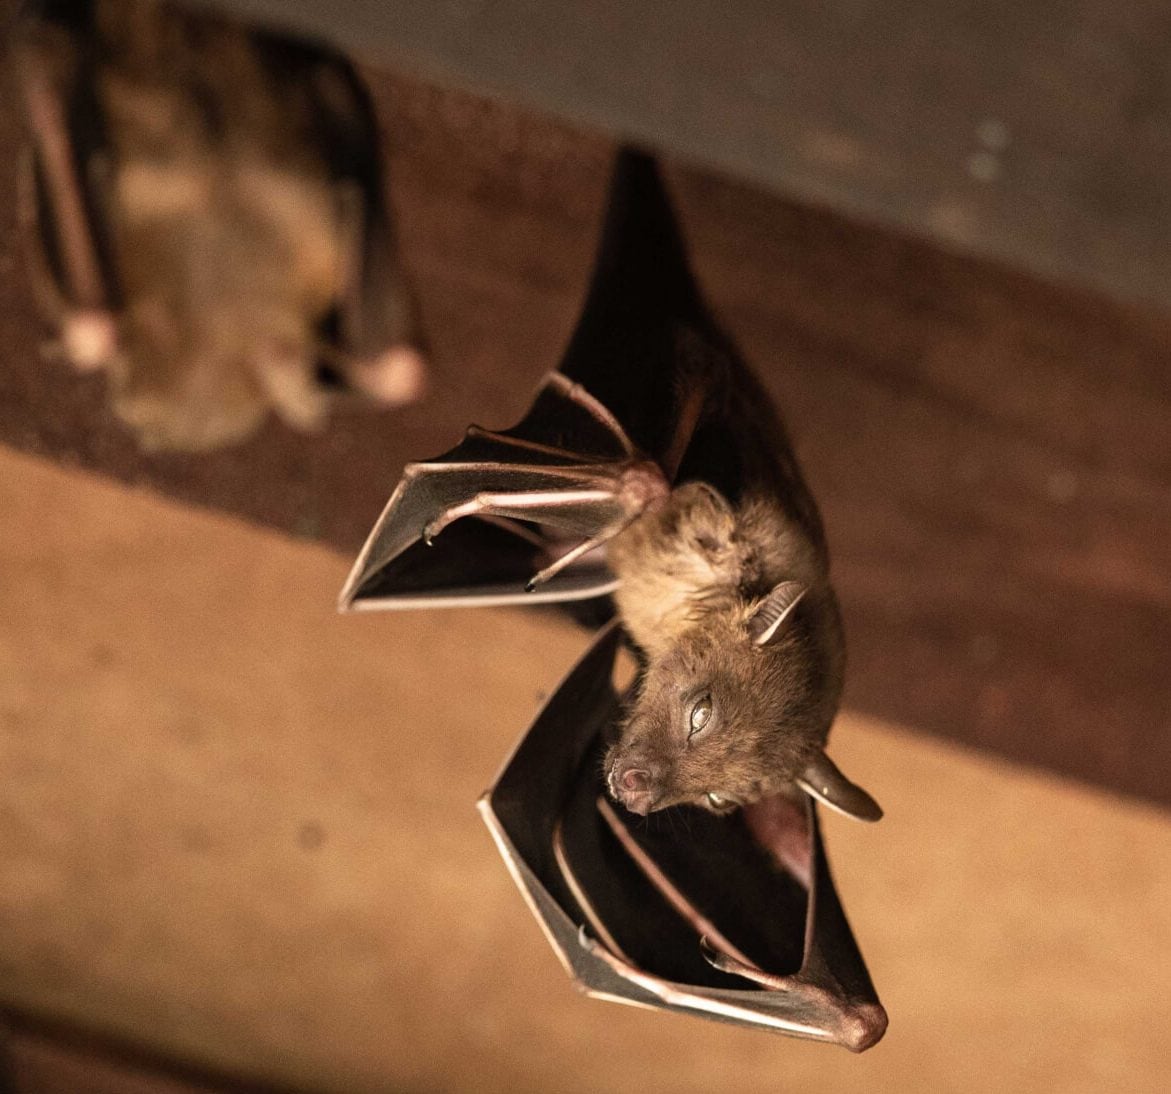 Expert bat removal services for a safe and humane solution in Richmond